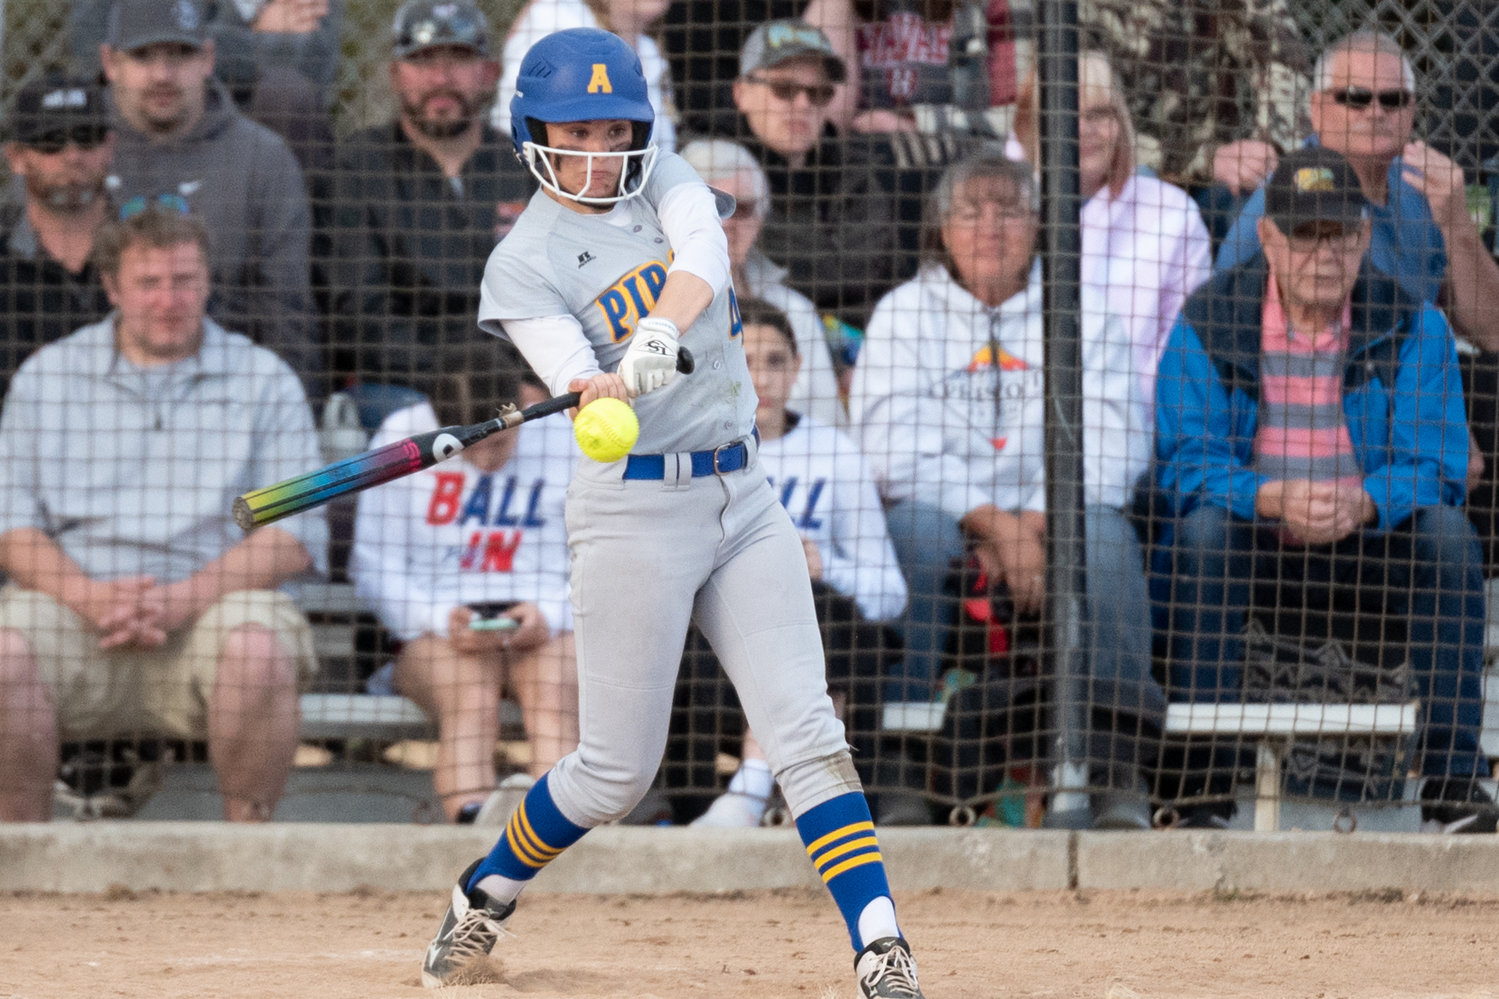 Adna's Grace Beaulieu makes contact with a pitch against PWV in the 2B District 4 softball championship game at Fort Borst Park in Centralia May 21.